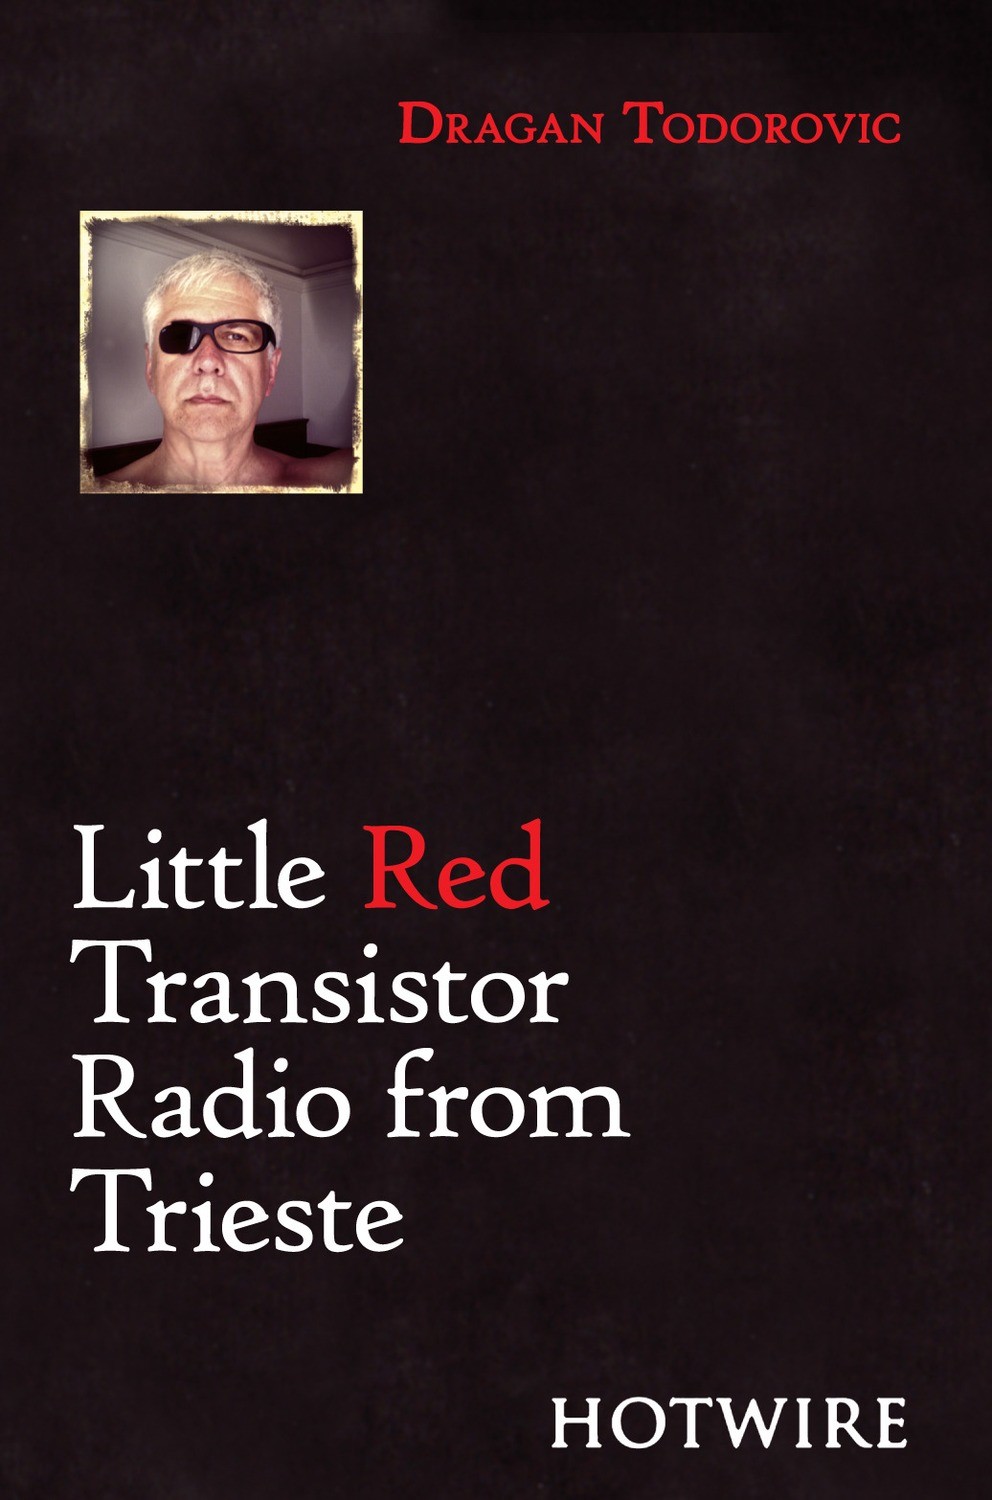 Little Red Transistor Radio from Trieste - Dragan Todorovic